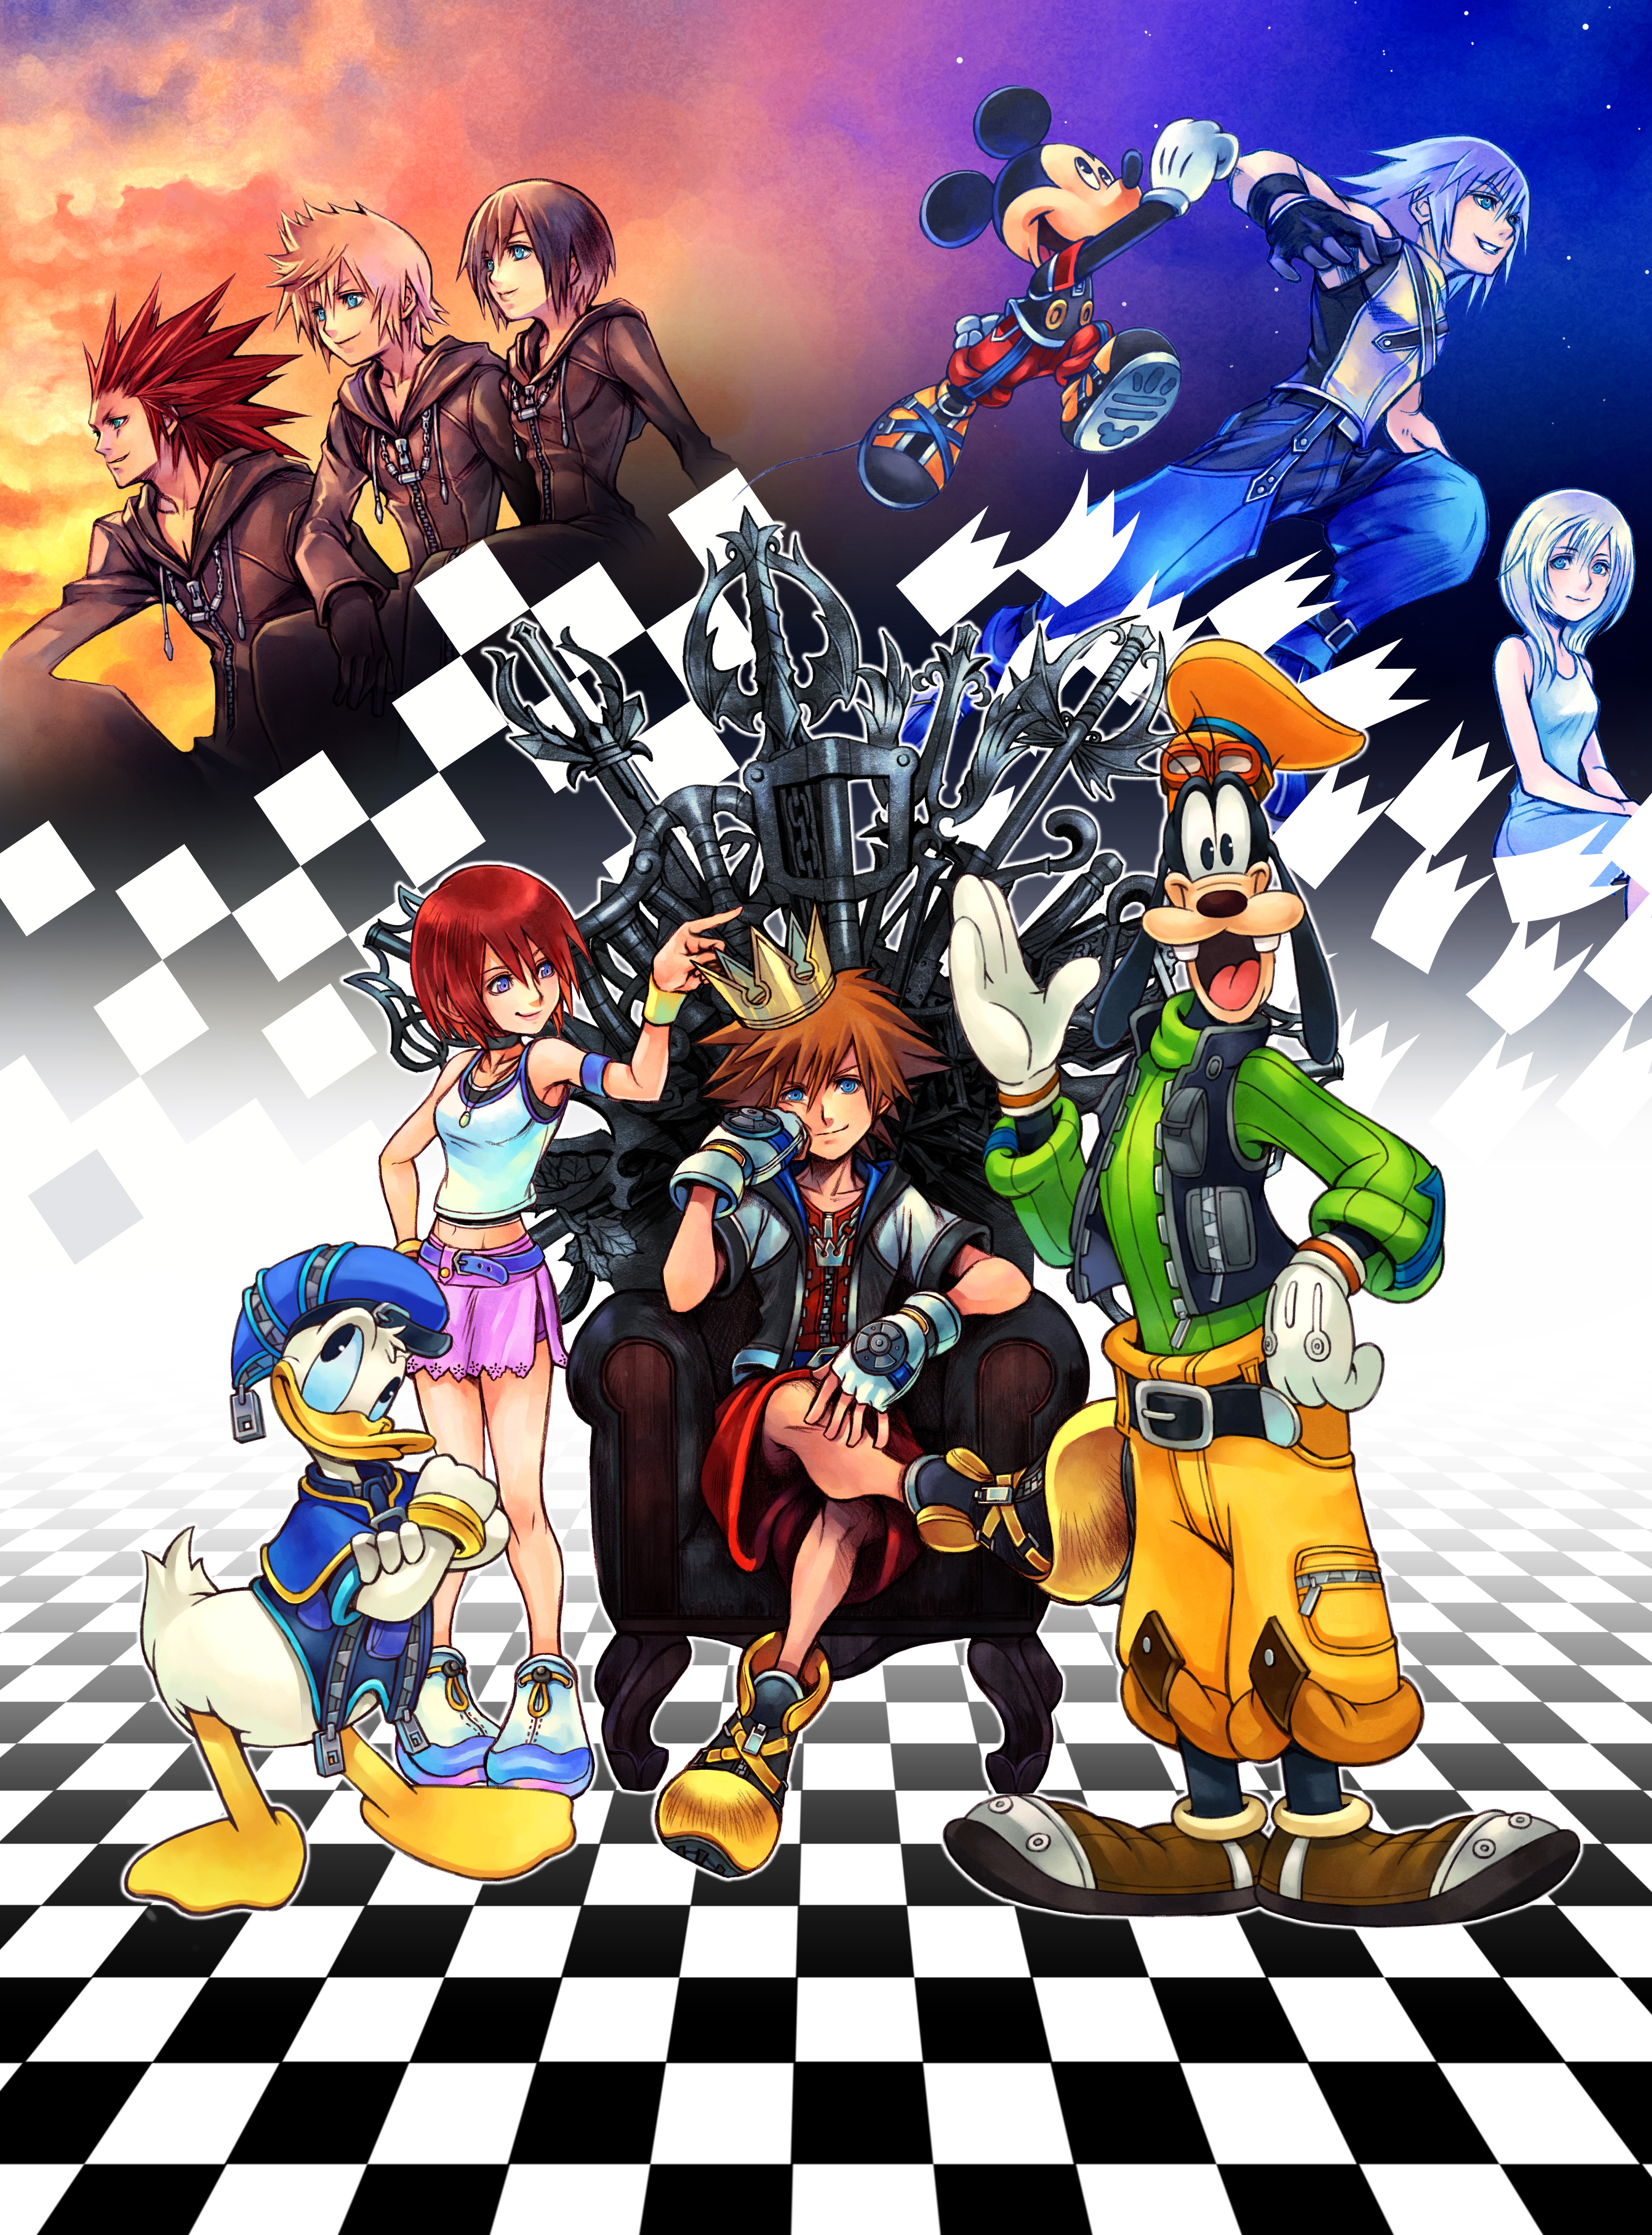 Free Download Kingdom Hearts 15 Smartphone Wallpaper Ps3 Theme From 7 11 News 5400x7304 For Your Desktop Mobile Tablet Explore 49 Kingdom Hearts Phone Wallpapers Kingdom Hearts Iphone Wallpaper